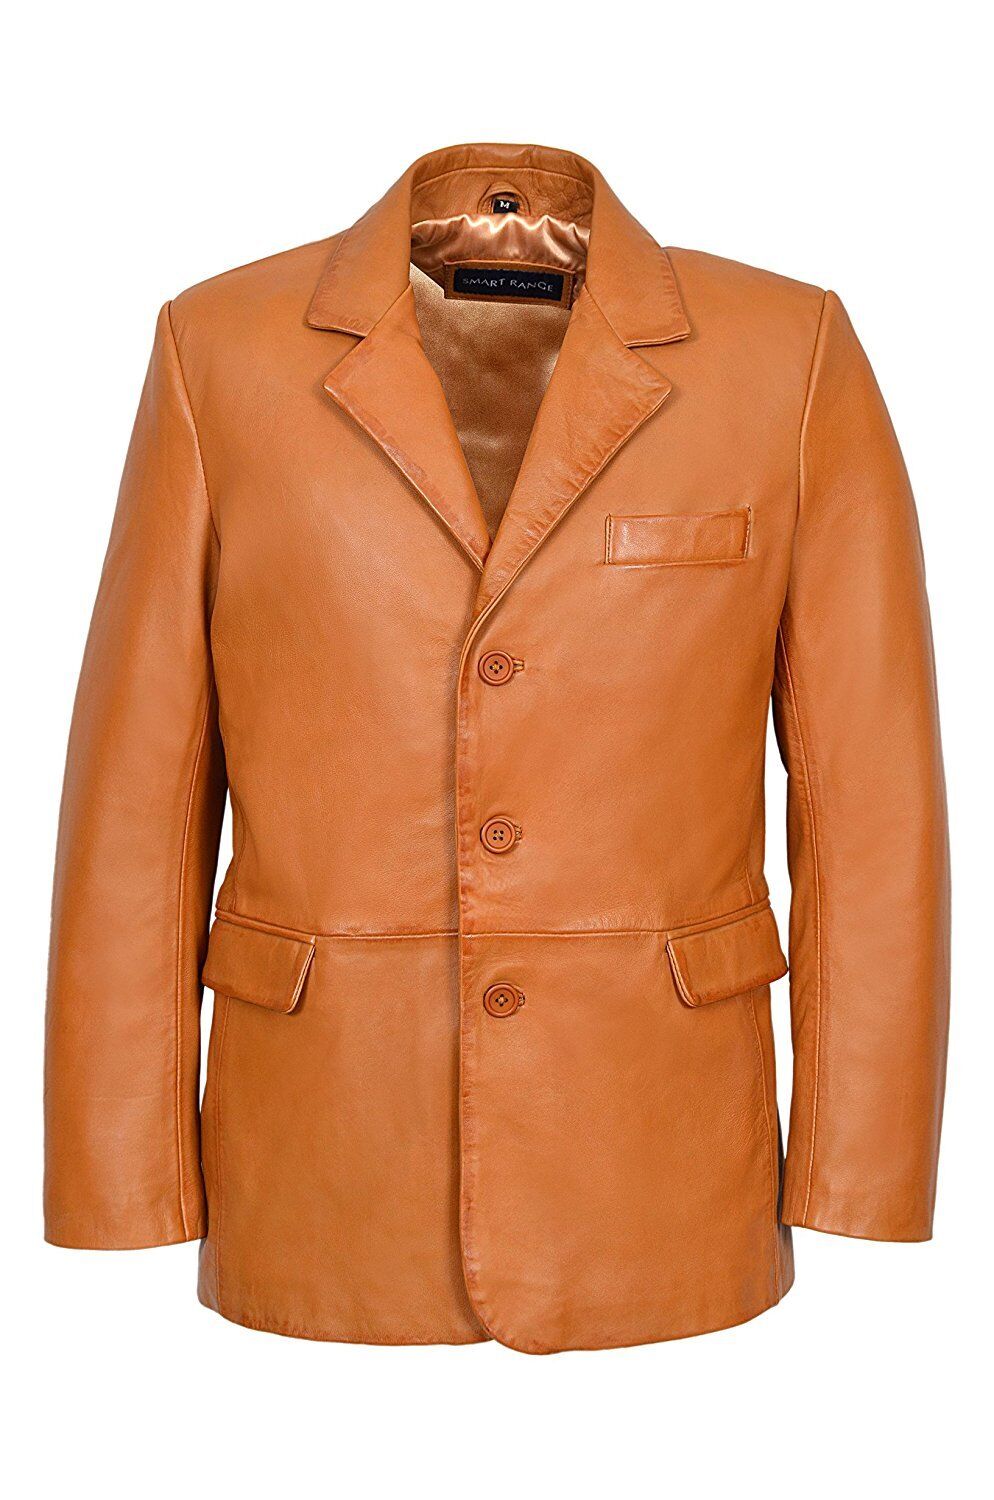 Pre-owned New Look Jimmy Tailored Fit Smart Look Style 3 Button Blazer Coat Tan Napa Leather